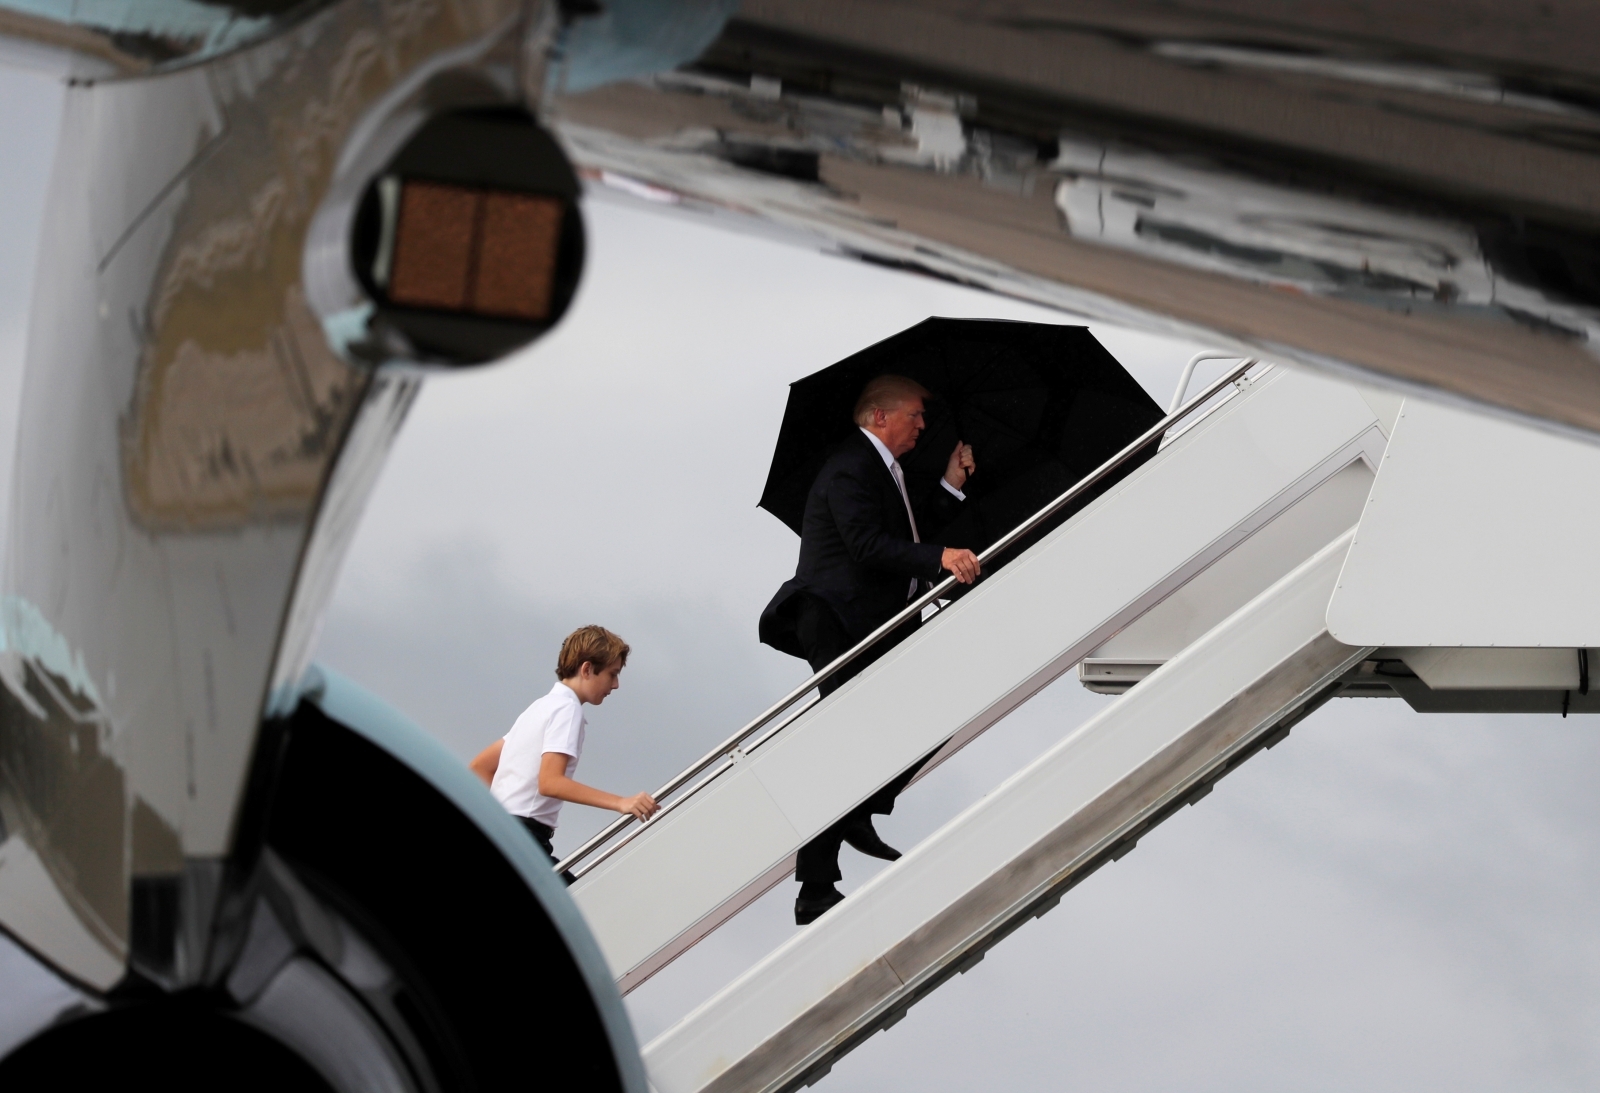 Get your own umbrella! Donald Trump leaves his rain-soaked family to fend for themselves1600 x 1093